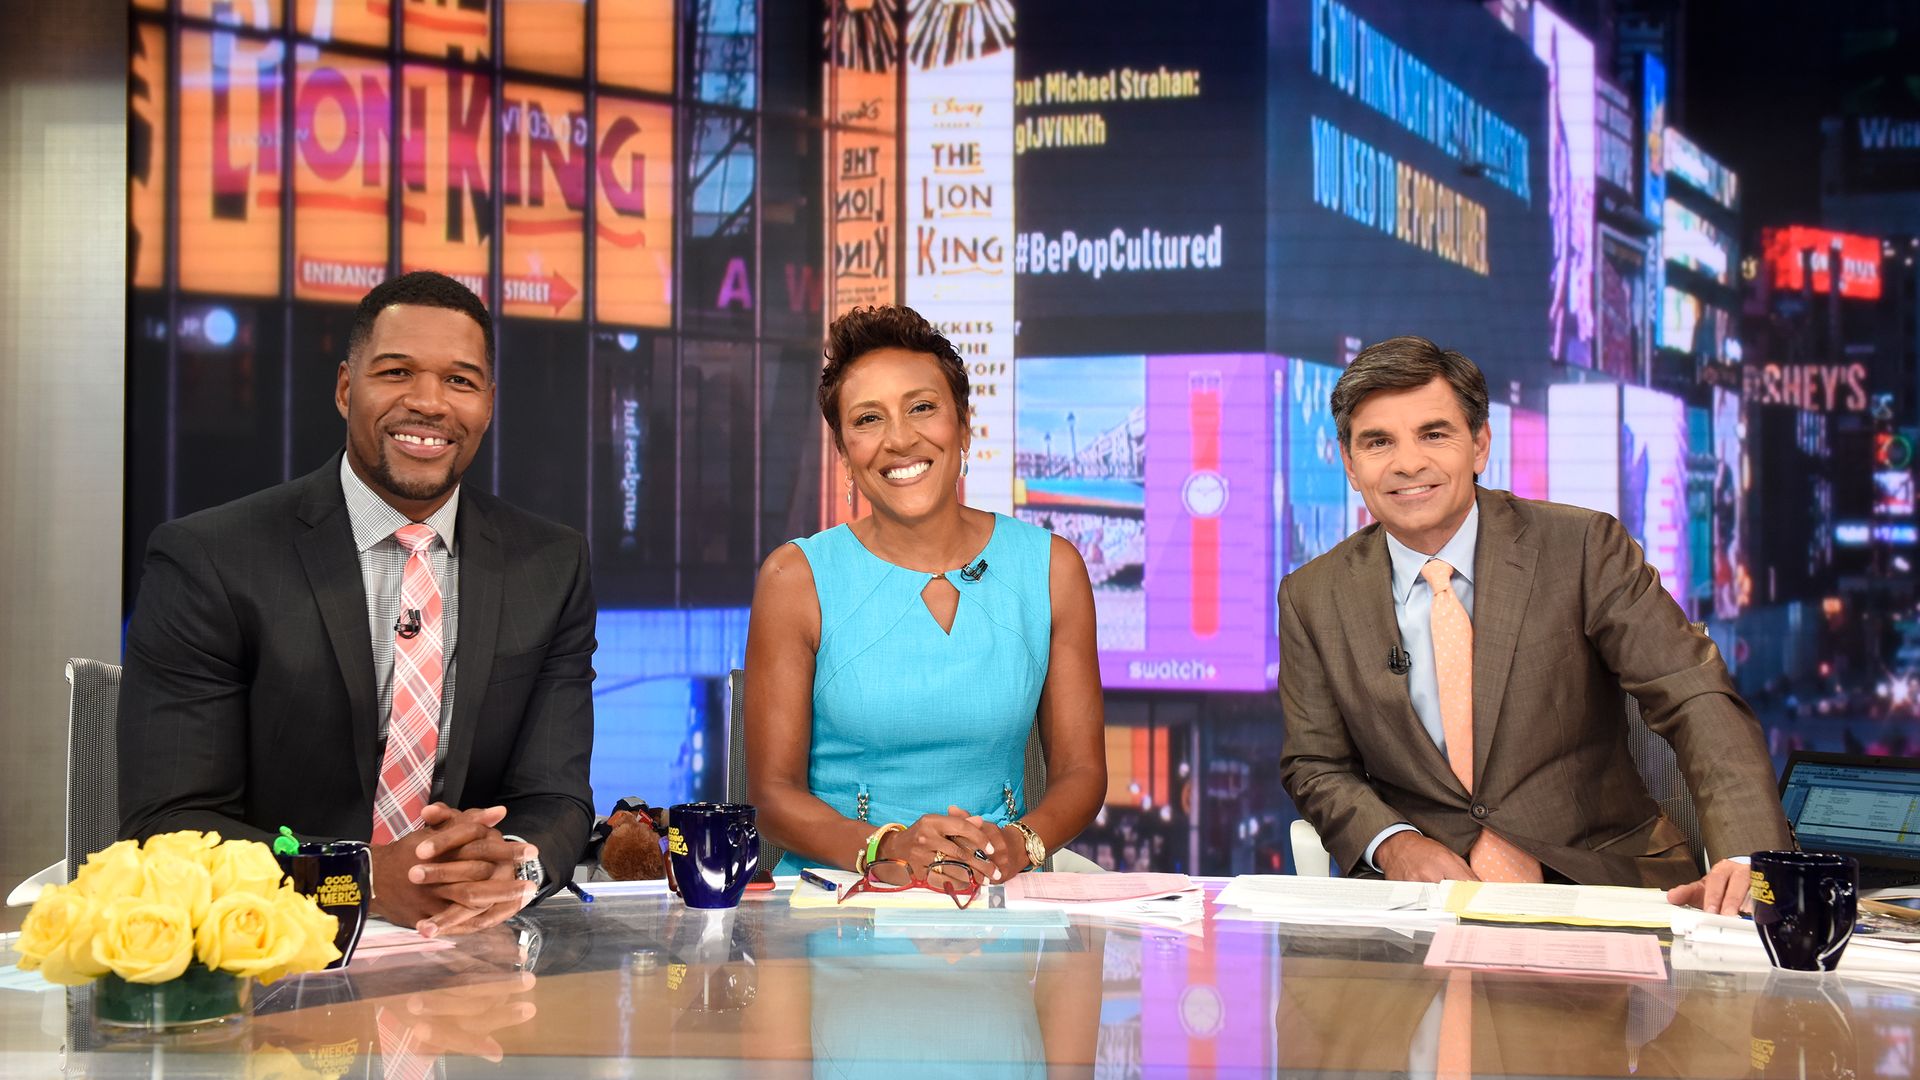 Michael Strahan is a co-host on GMA alongside Robin Roberts and George Stephanopoulos